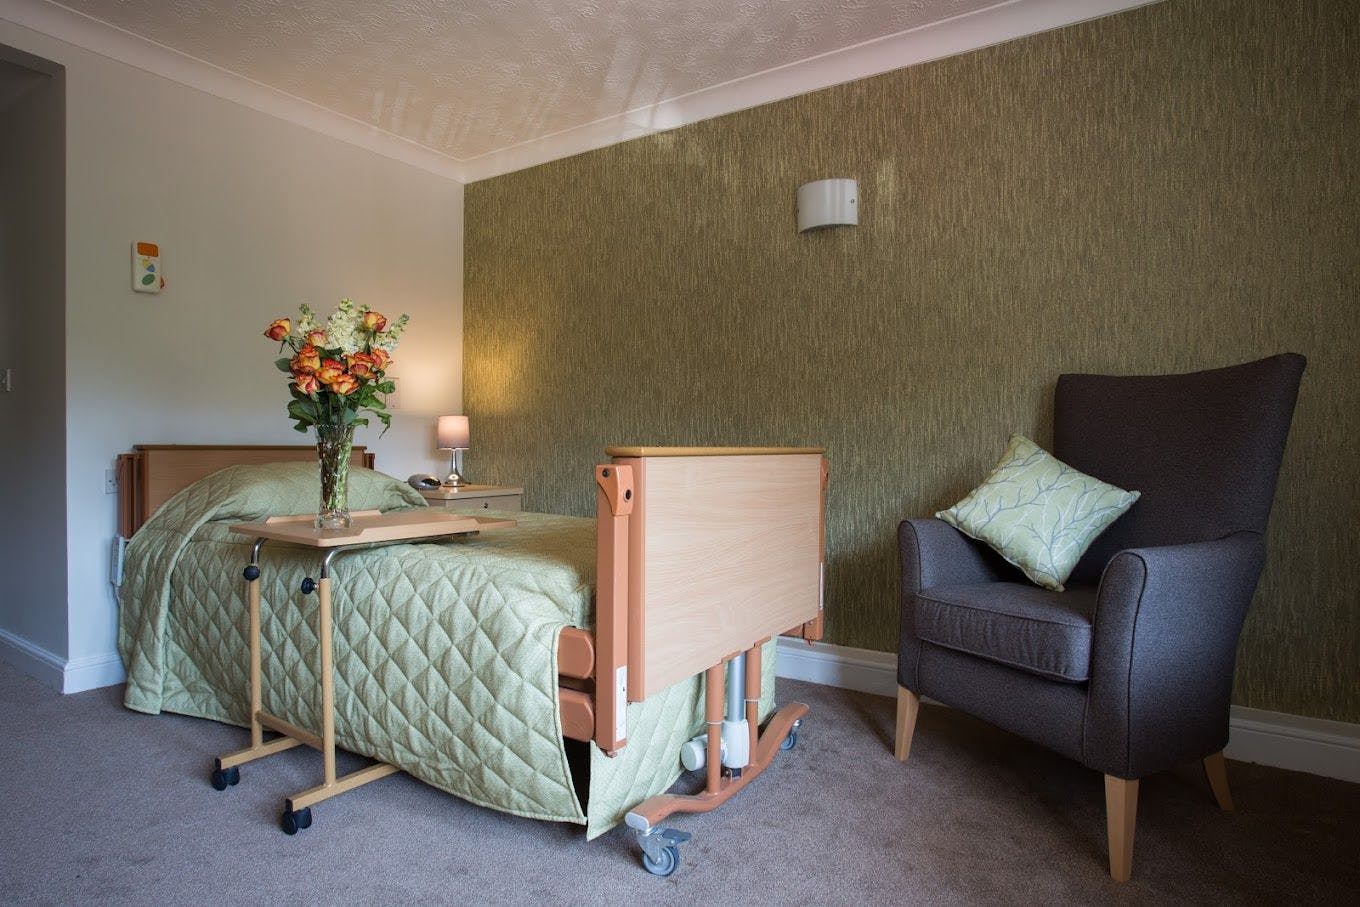 Bedroom at Queensmount Care Home in Bournemouth, Dorset